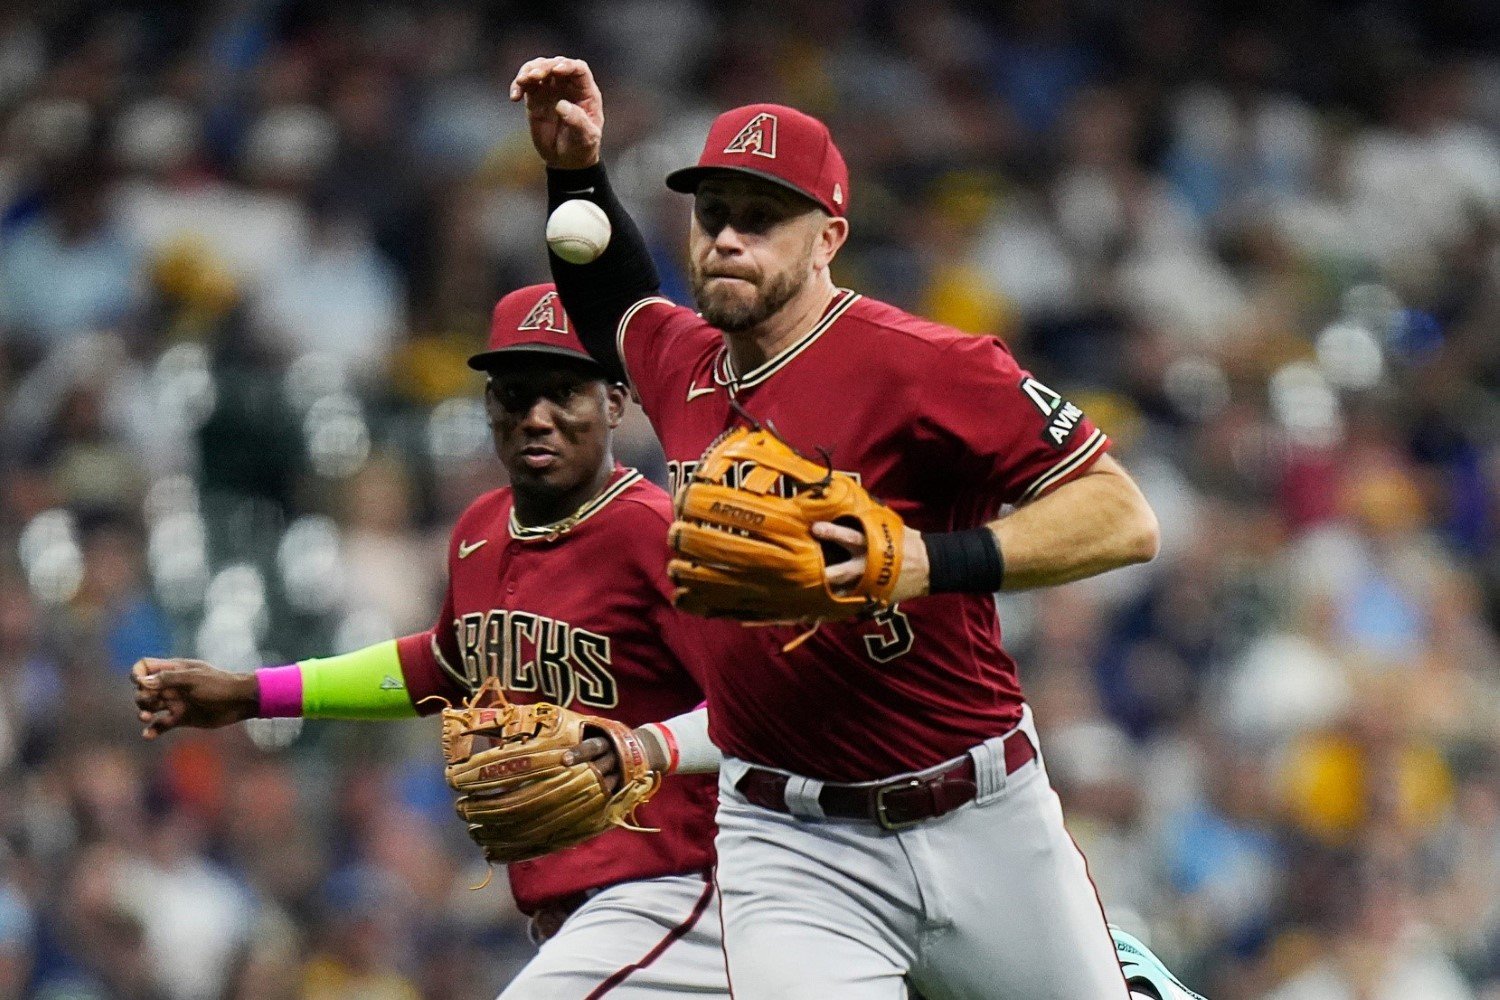 Diamondbacks come from behind to defeat Brewers with powerful home runs